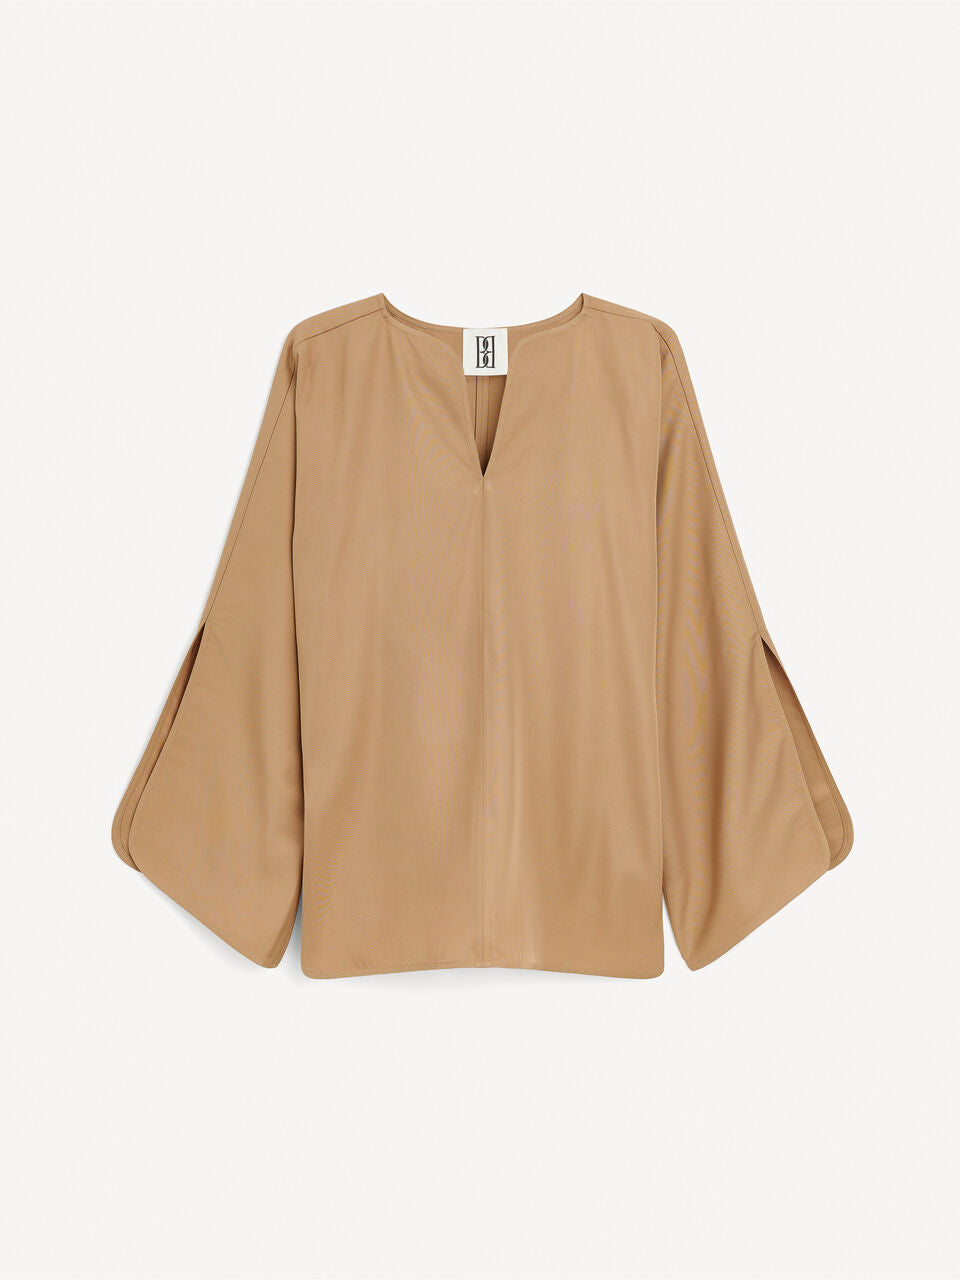 BY MALENE BIRGER - Calis Tunic Style Blouse in Tobacco Brown